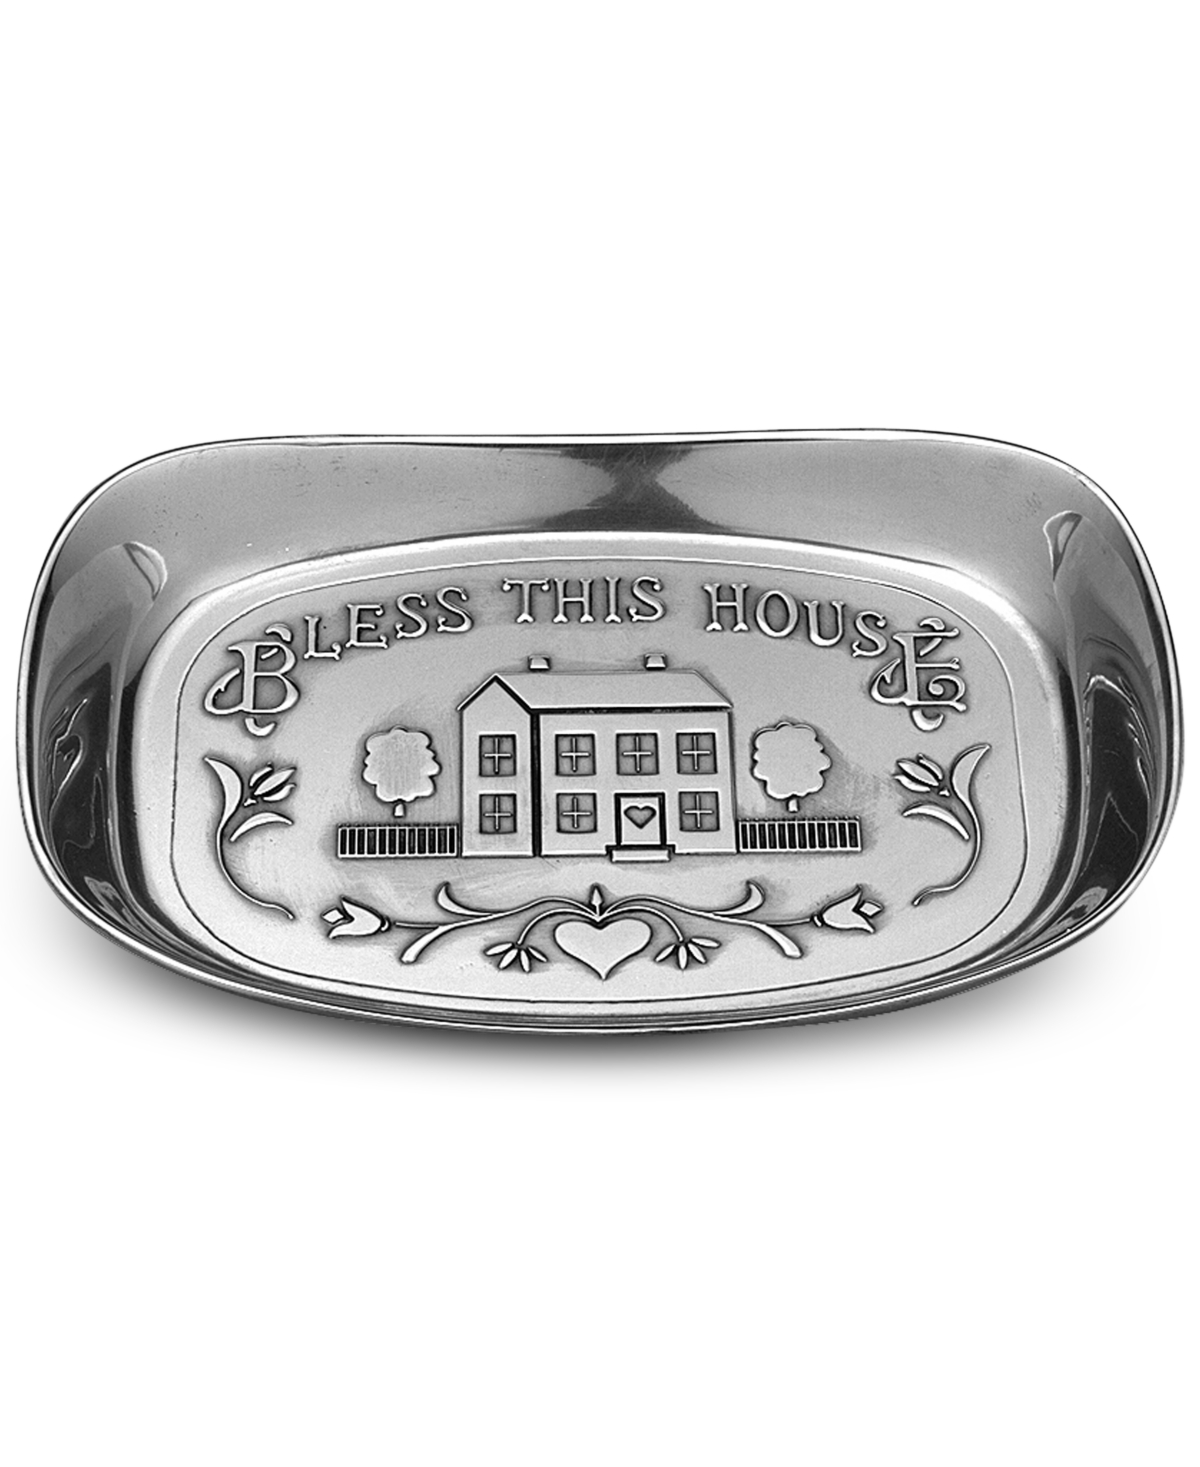 UPC 019328032372 product image for Wilton Armetale Bless This House Serving Dish | upcitemdb.com